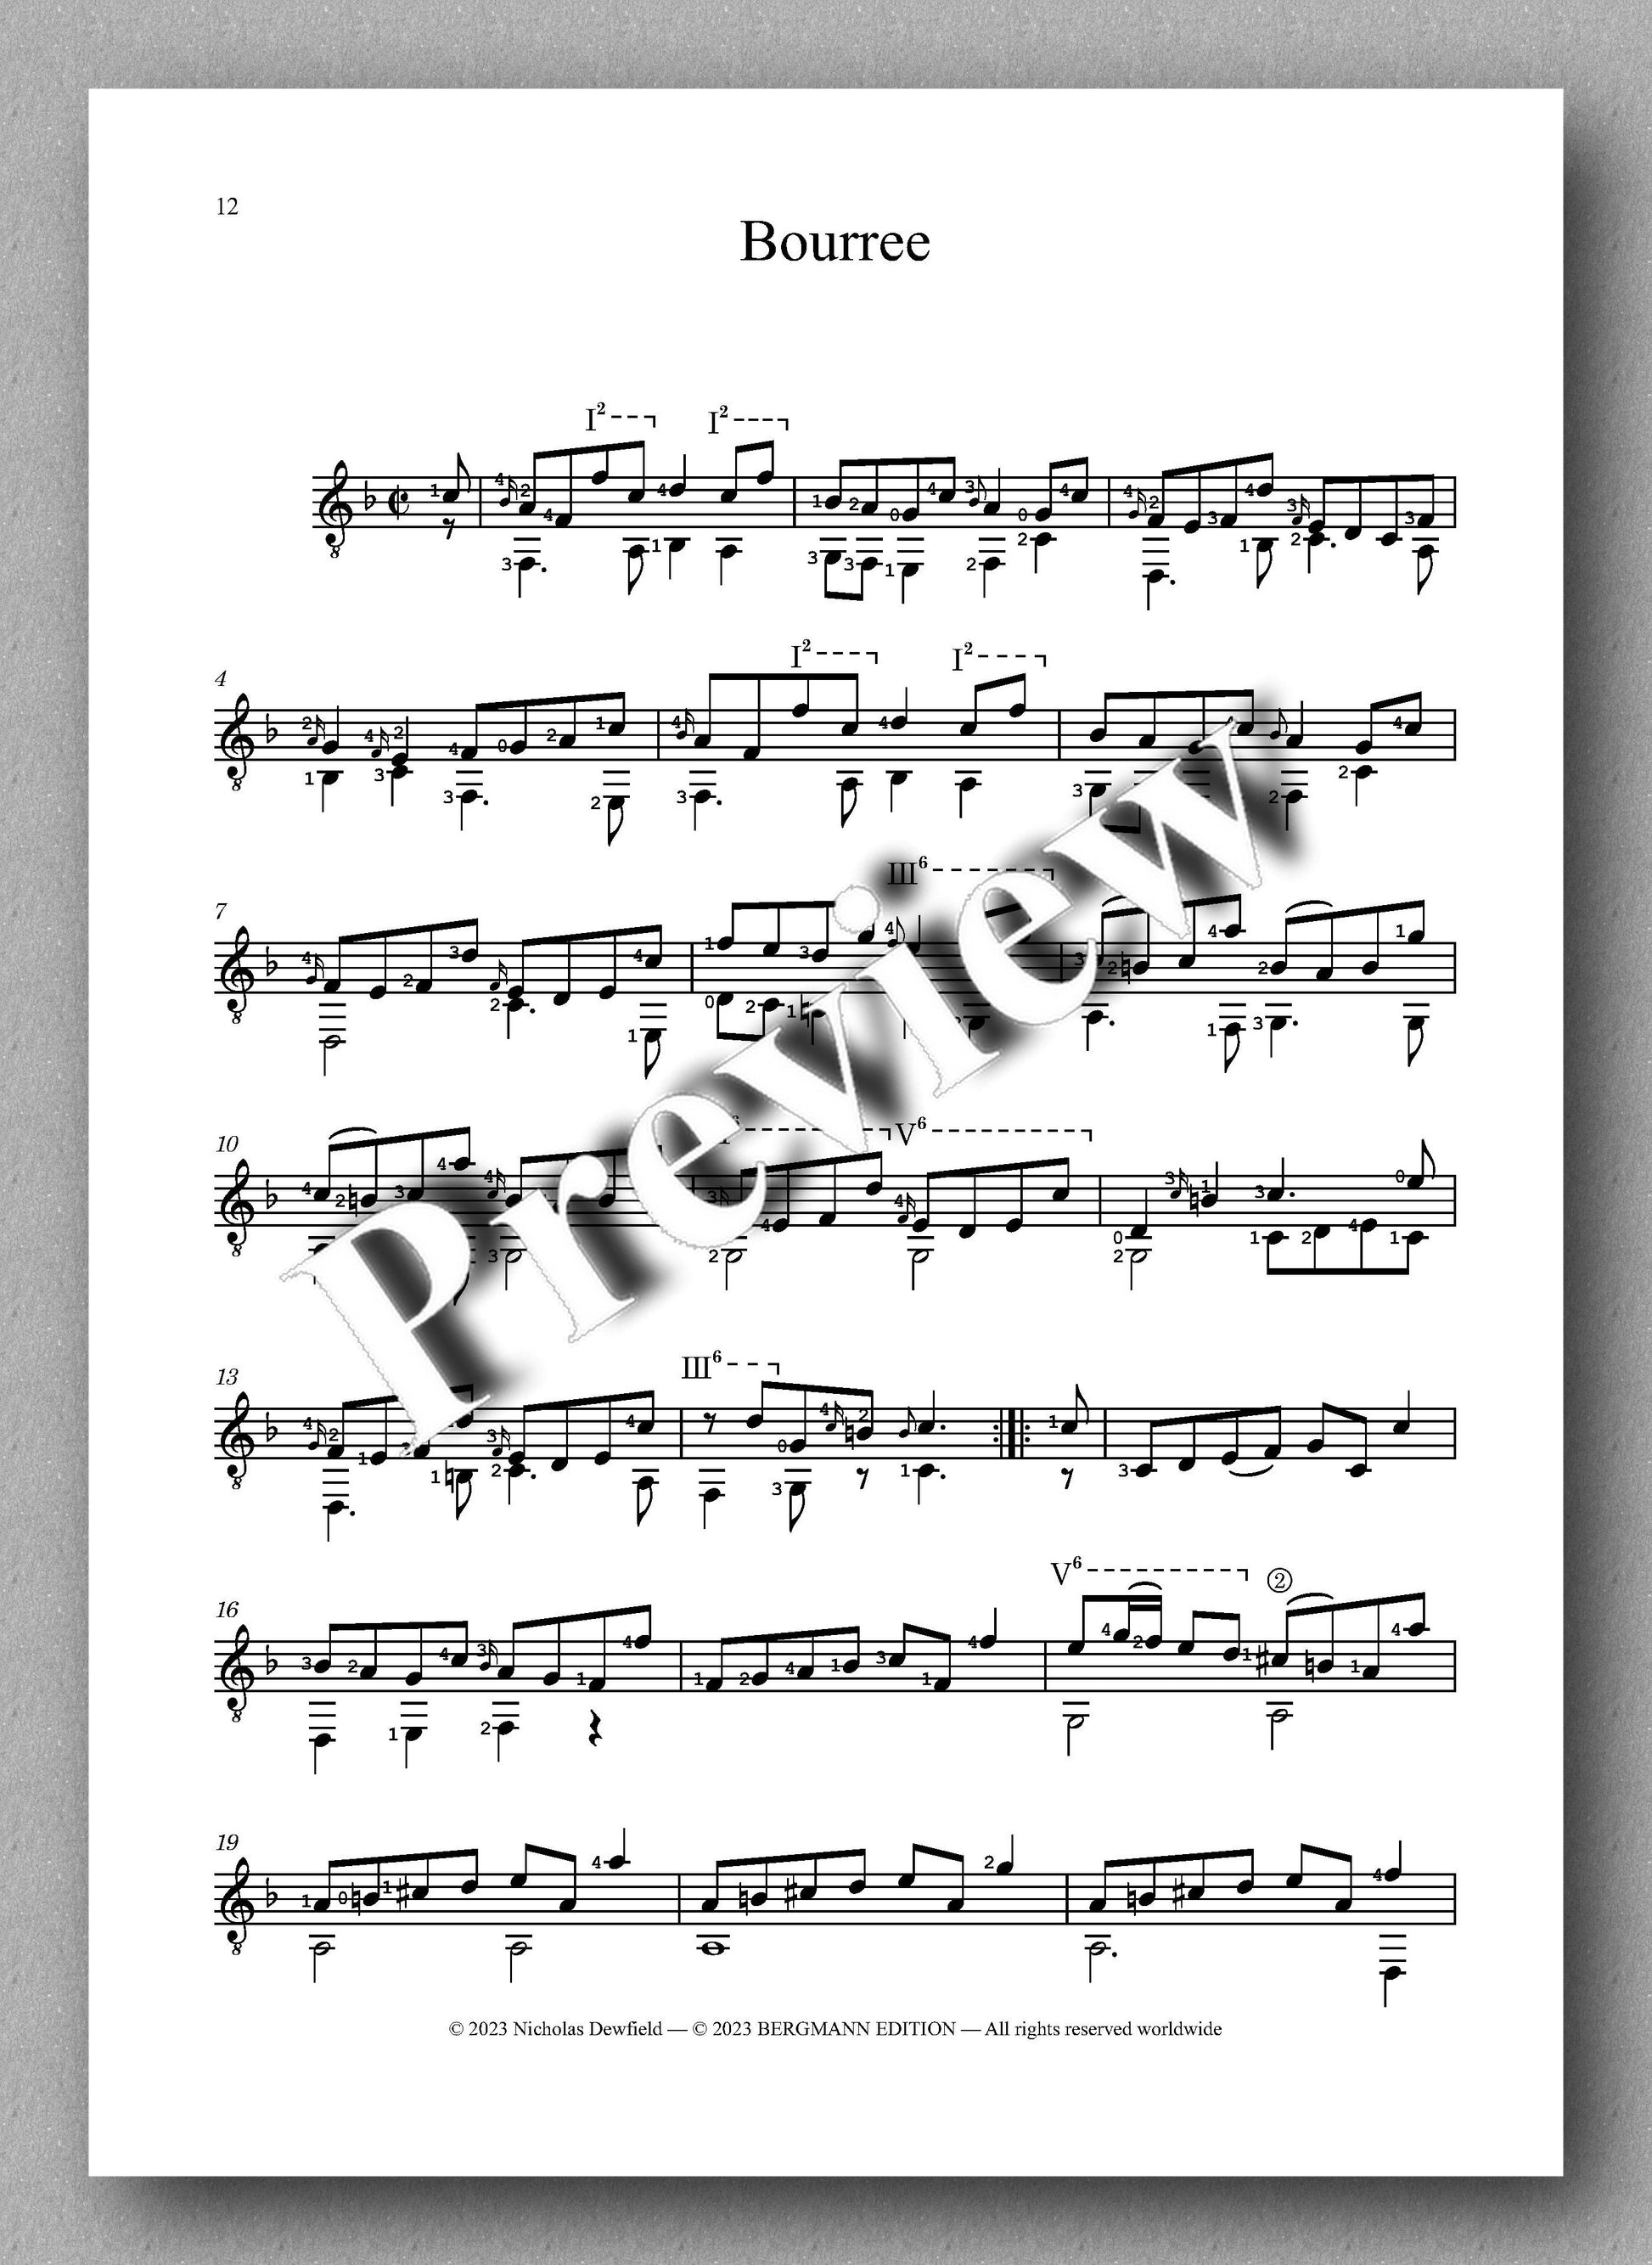 Sylvius Leopold Weiss (1687-1750), Sonata No. 19 - preview of the music score 4